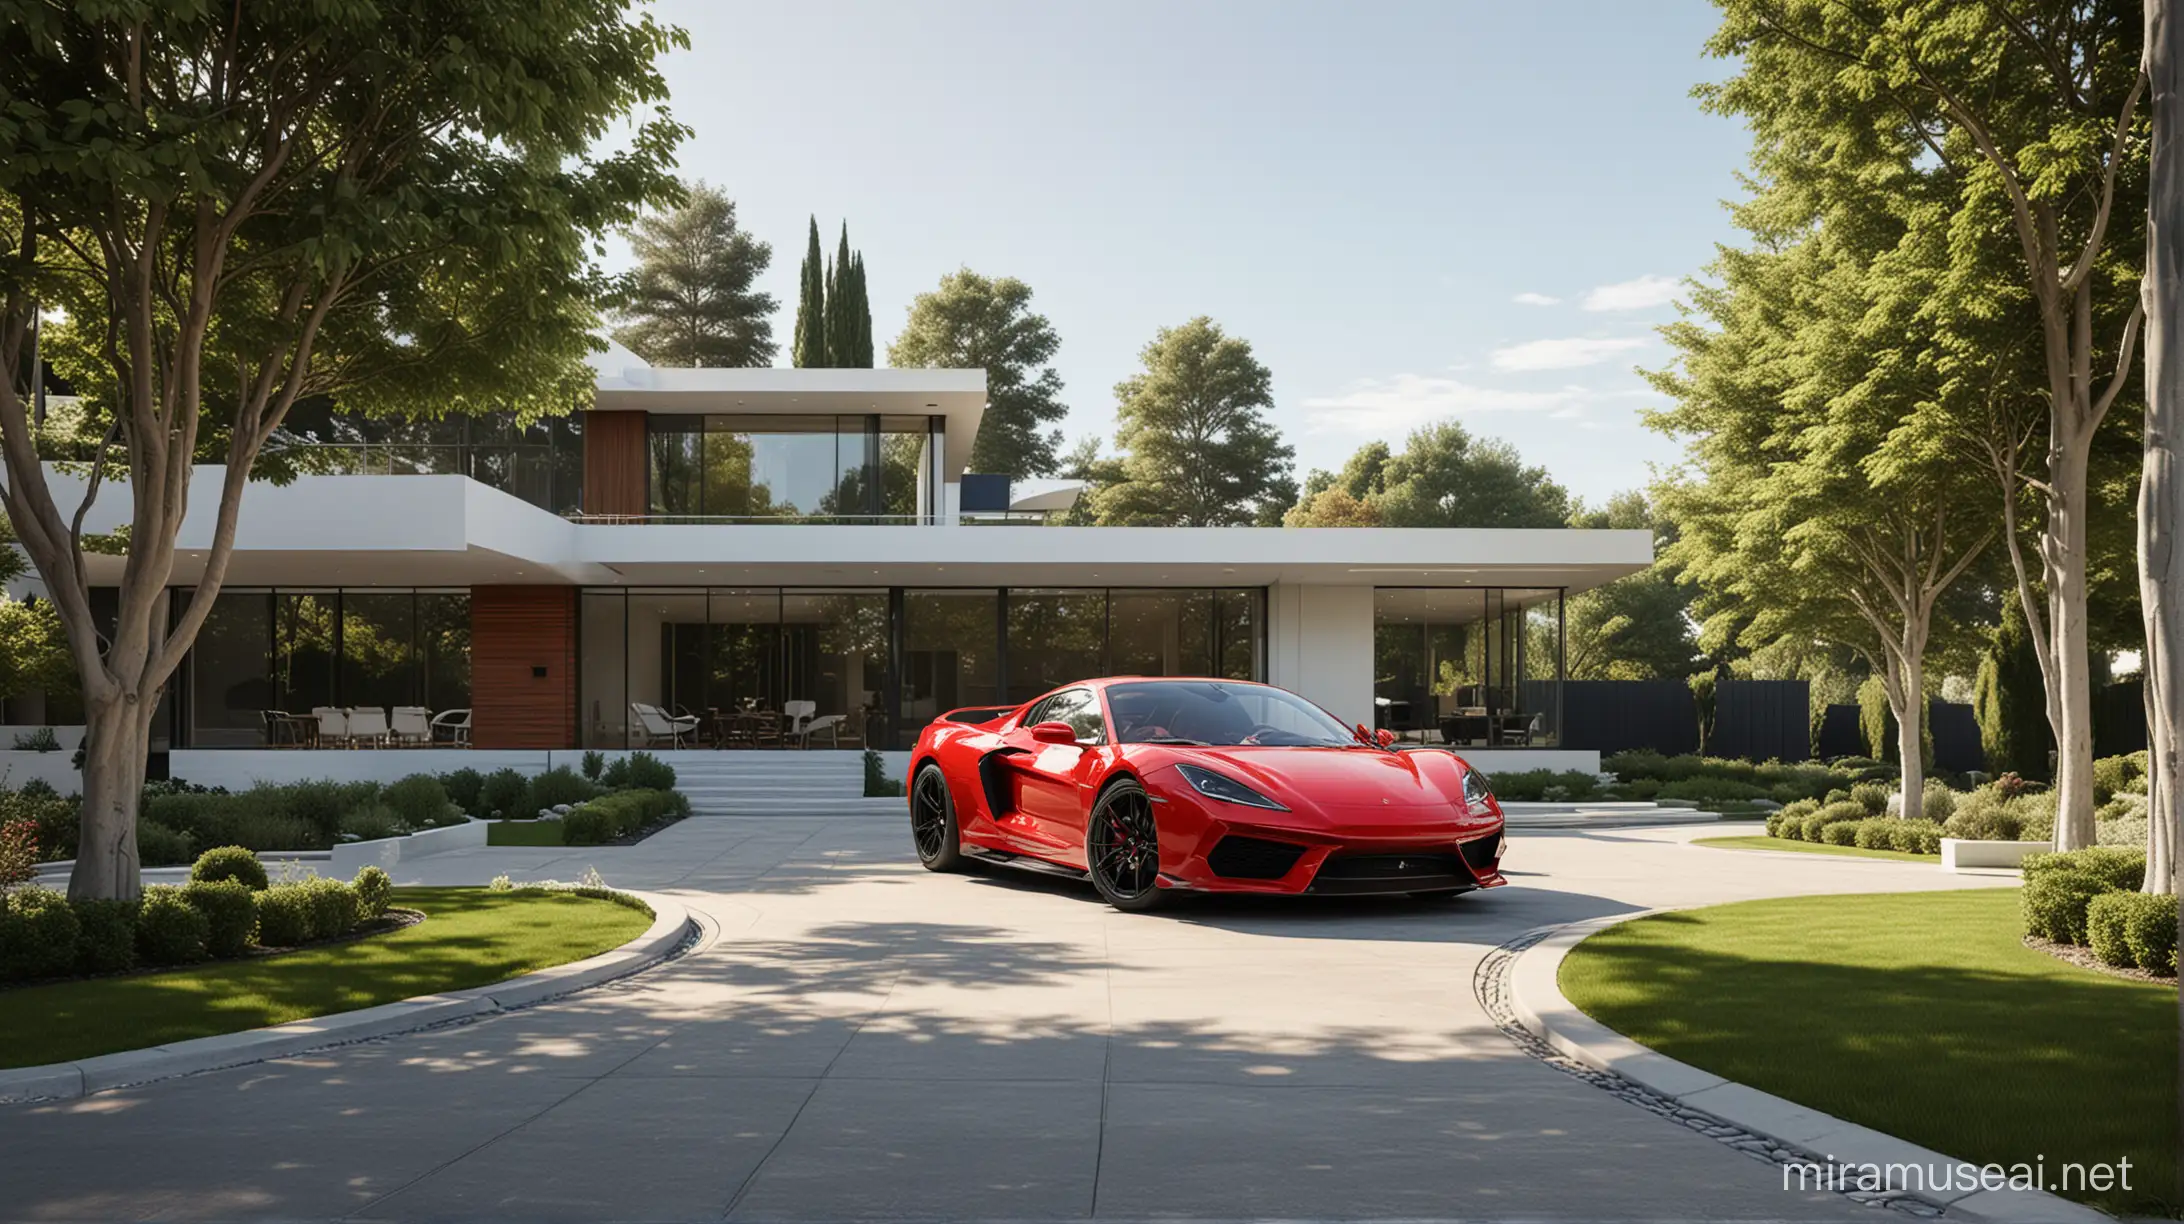 Luxurious Contemporary House and Sports Car in Affluent Residential Setting